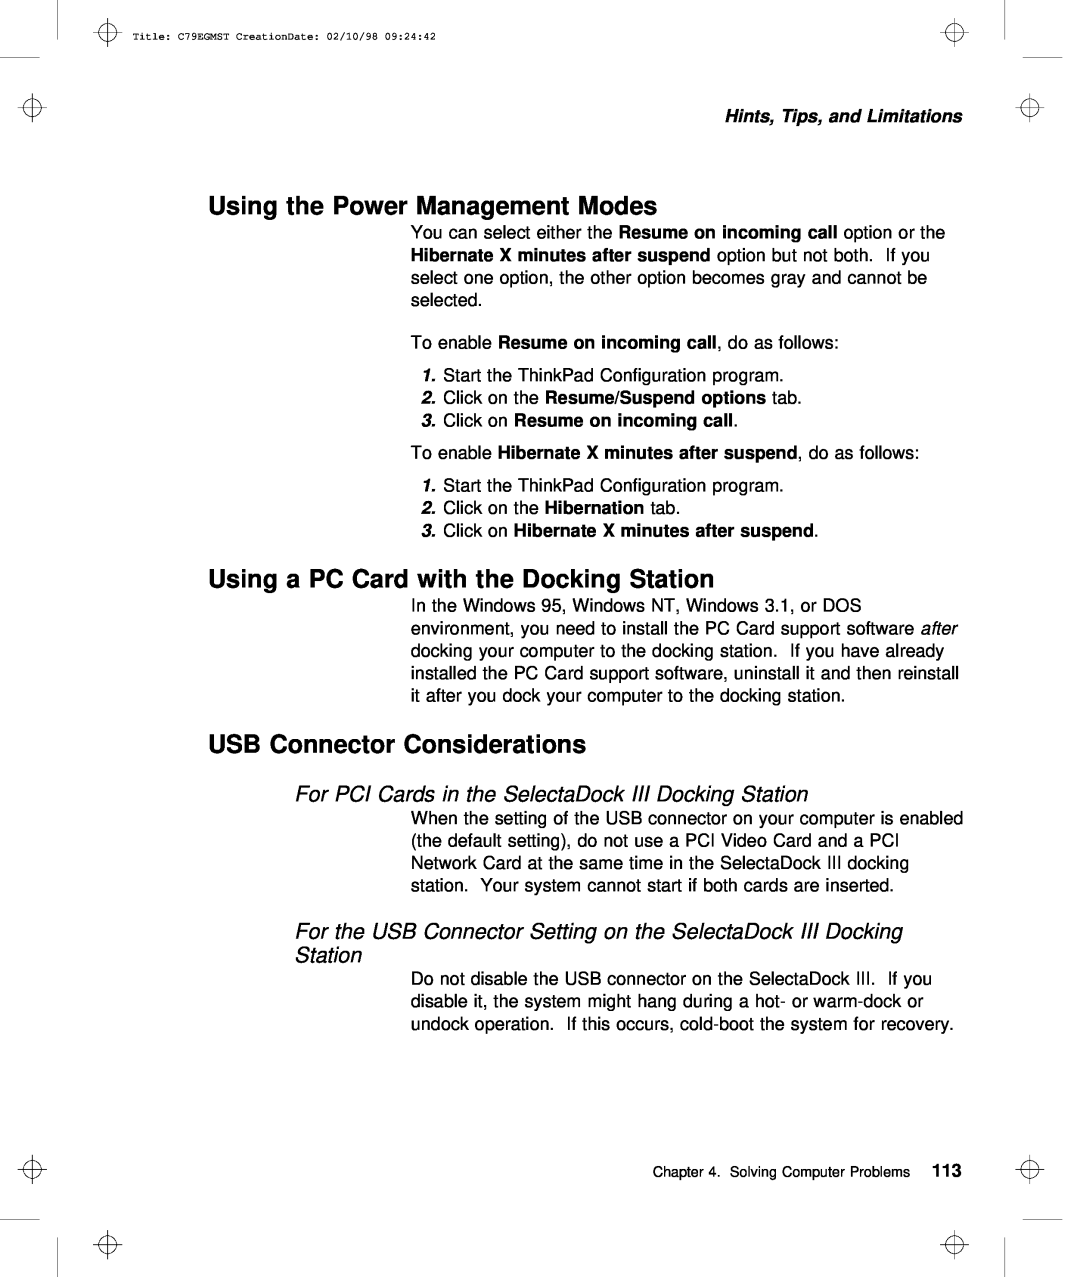 IBM C79EGMST Station, USB Connector Considerations, Using the Power Management Modes, Using a PC Card with, call, after 